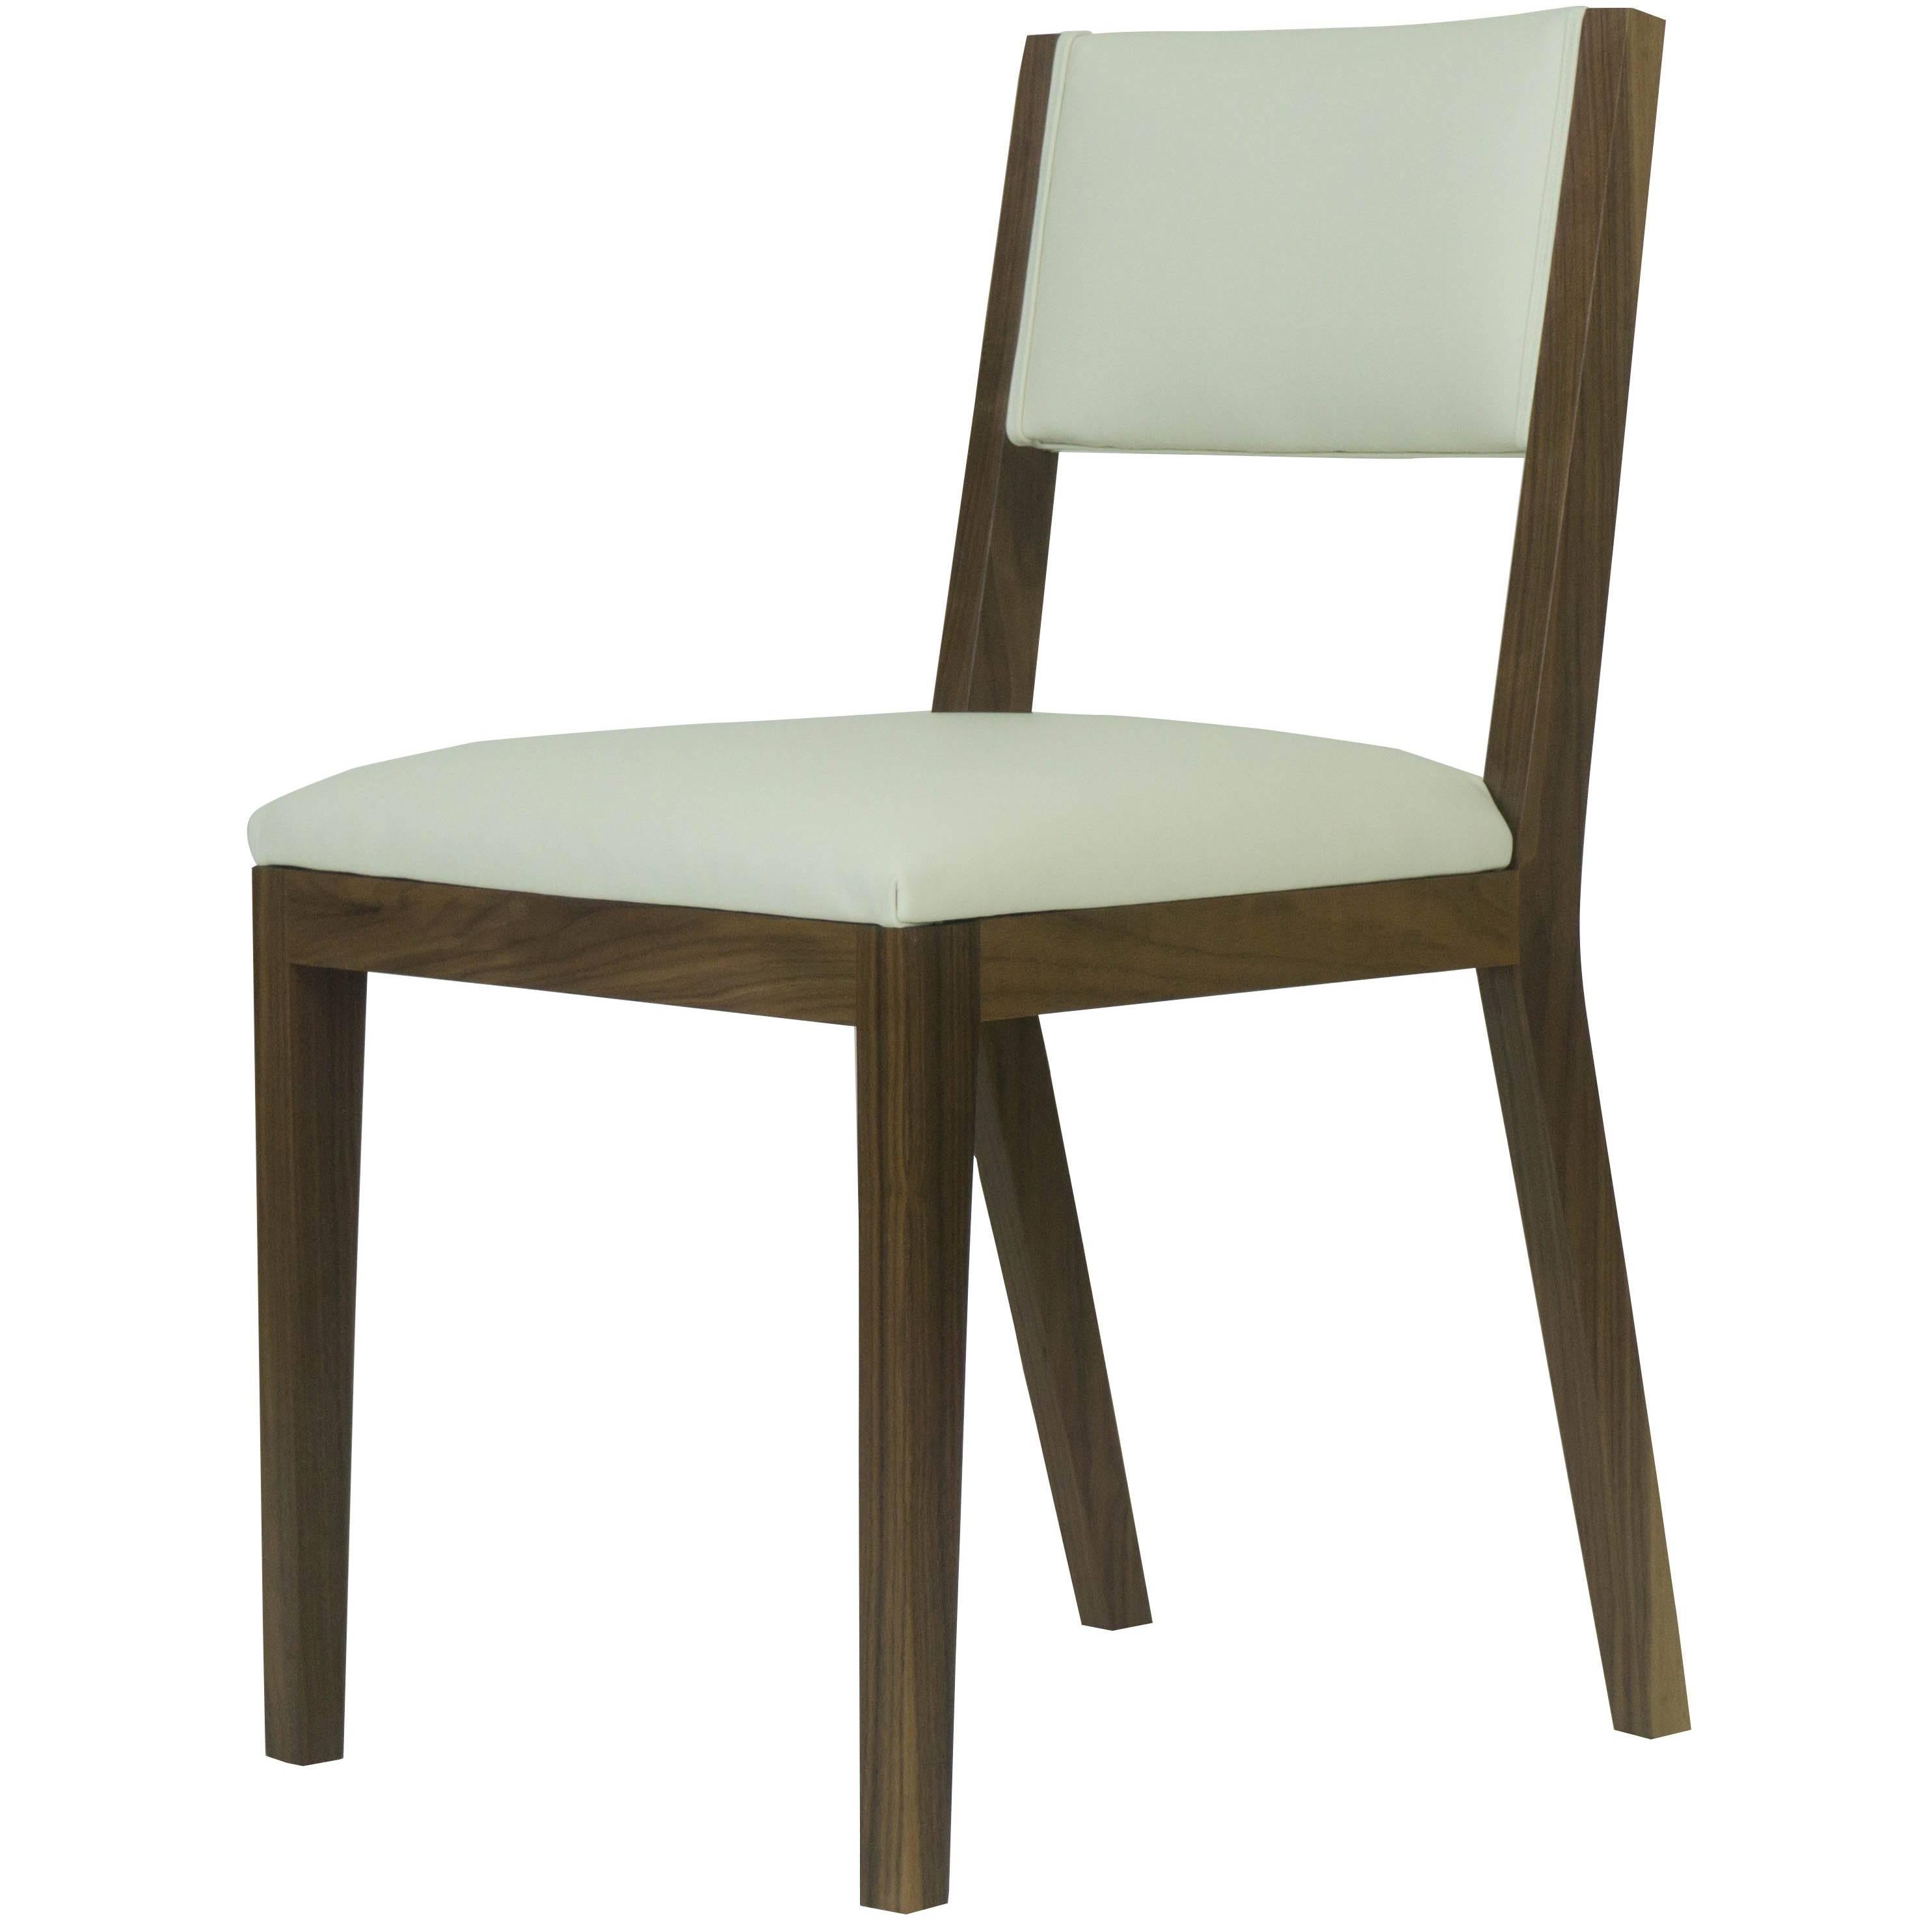 Scandinavian Modern Walnut and Cream Leather Dining Chair For Sale